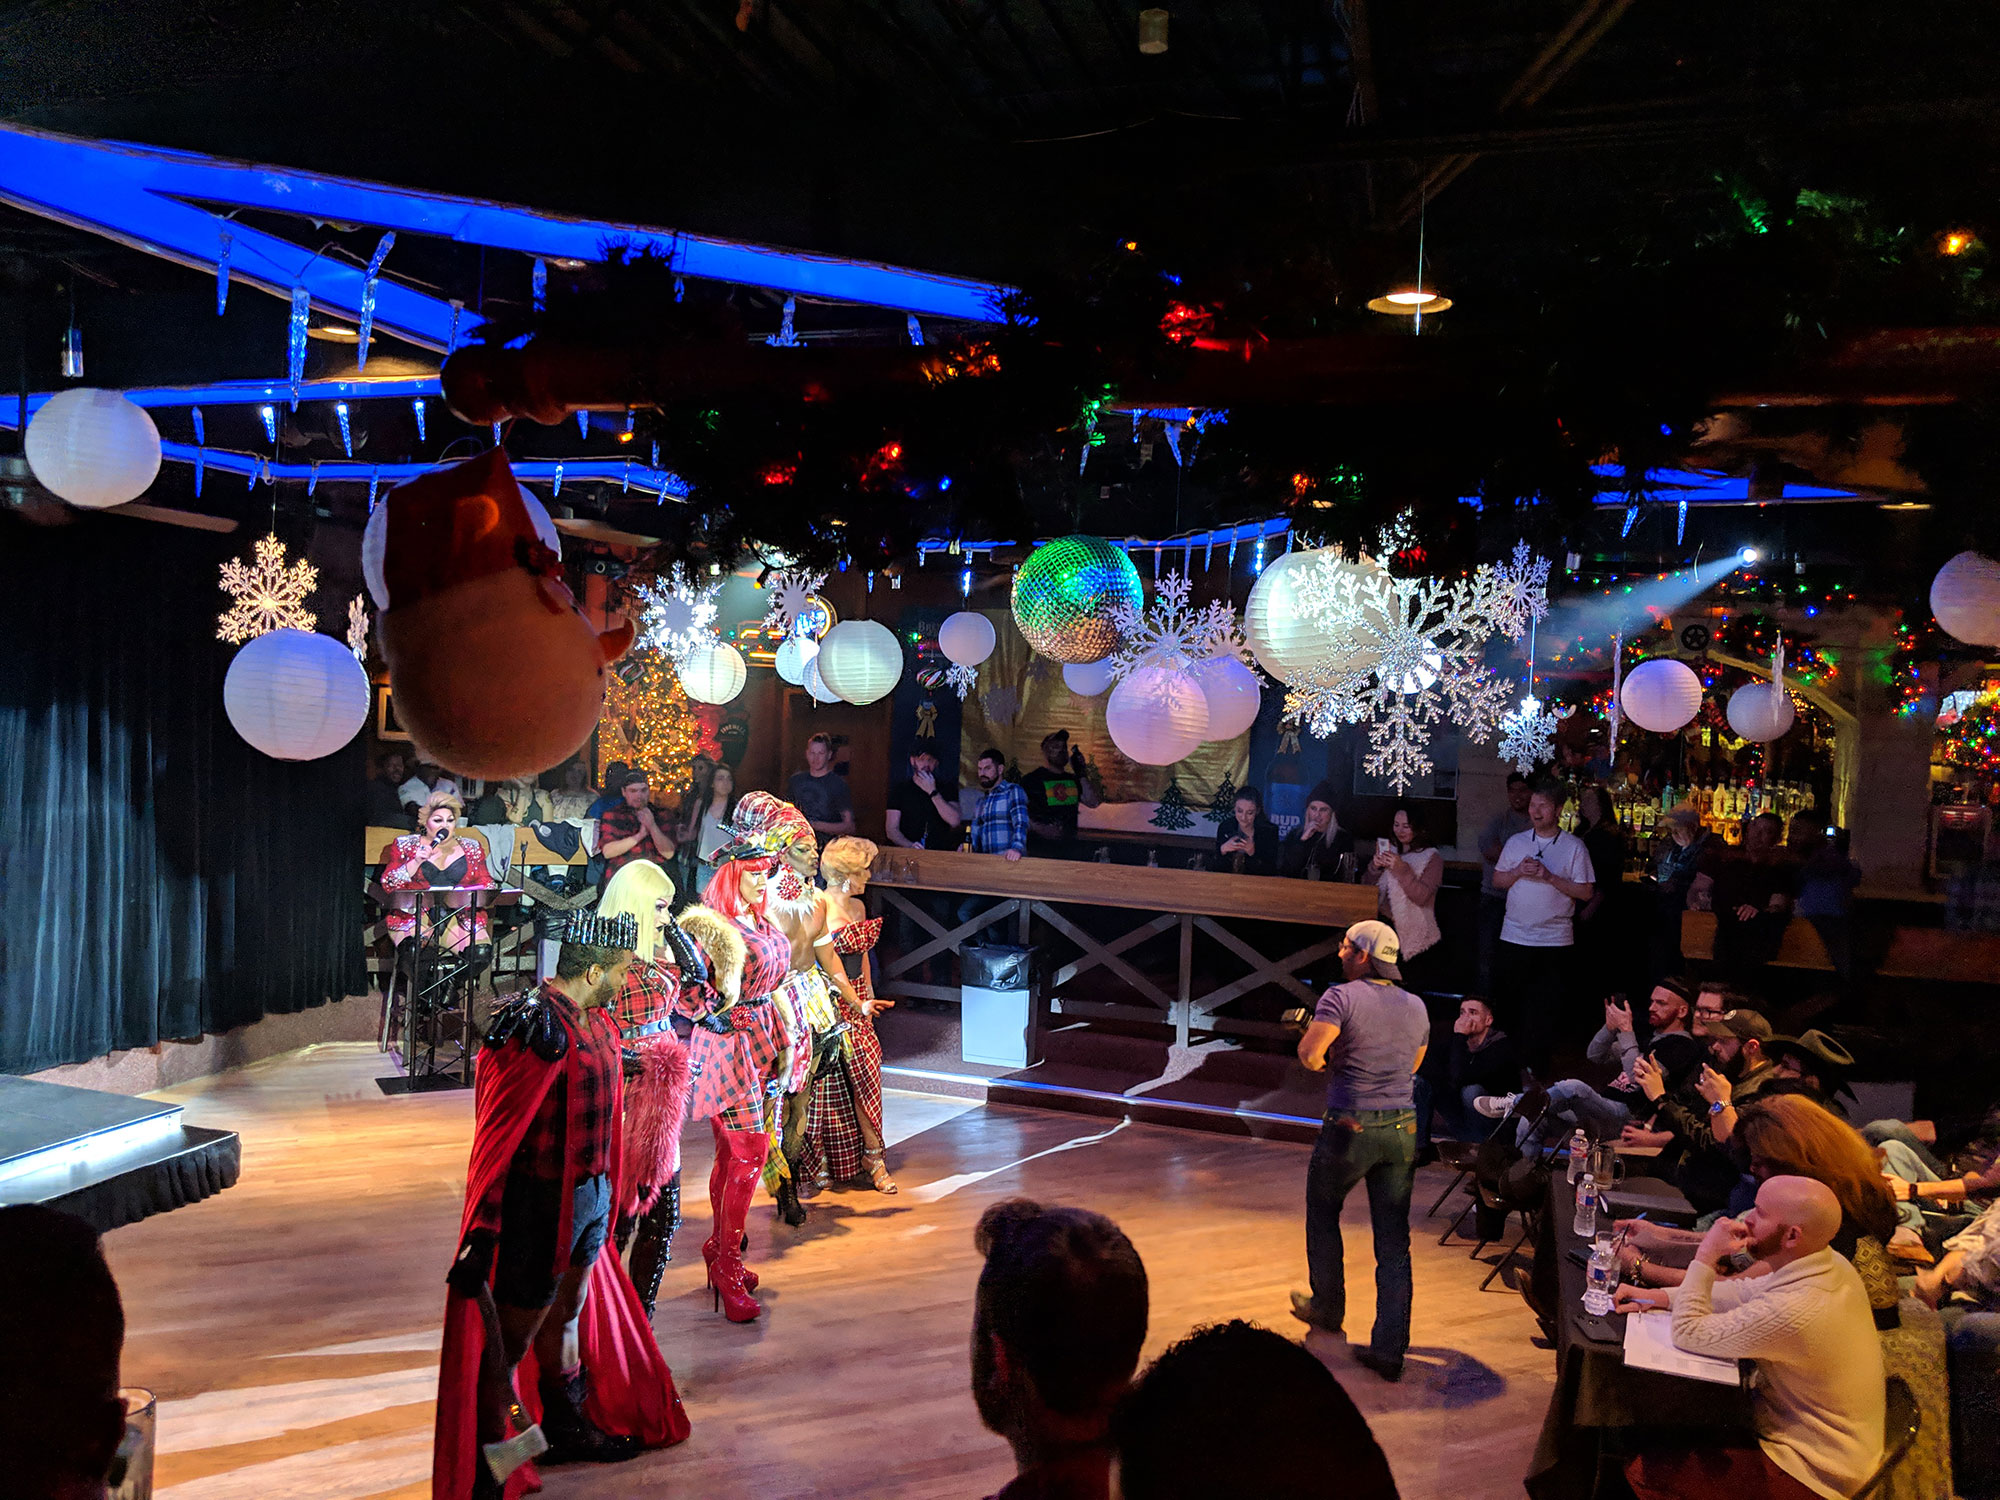 A drag pageant at the Roundup Saloon in Oak Lawn, Dallas.